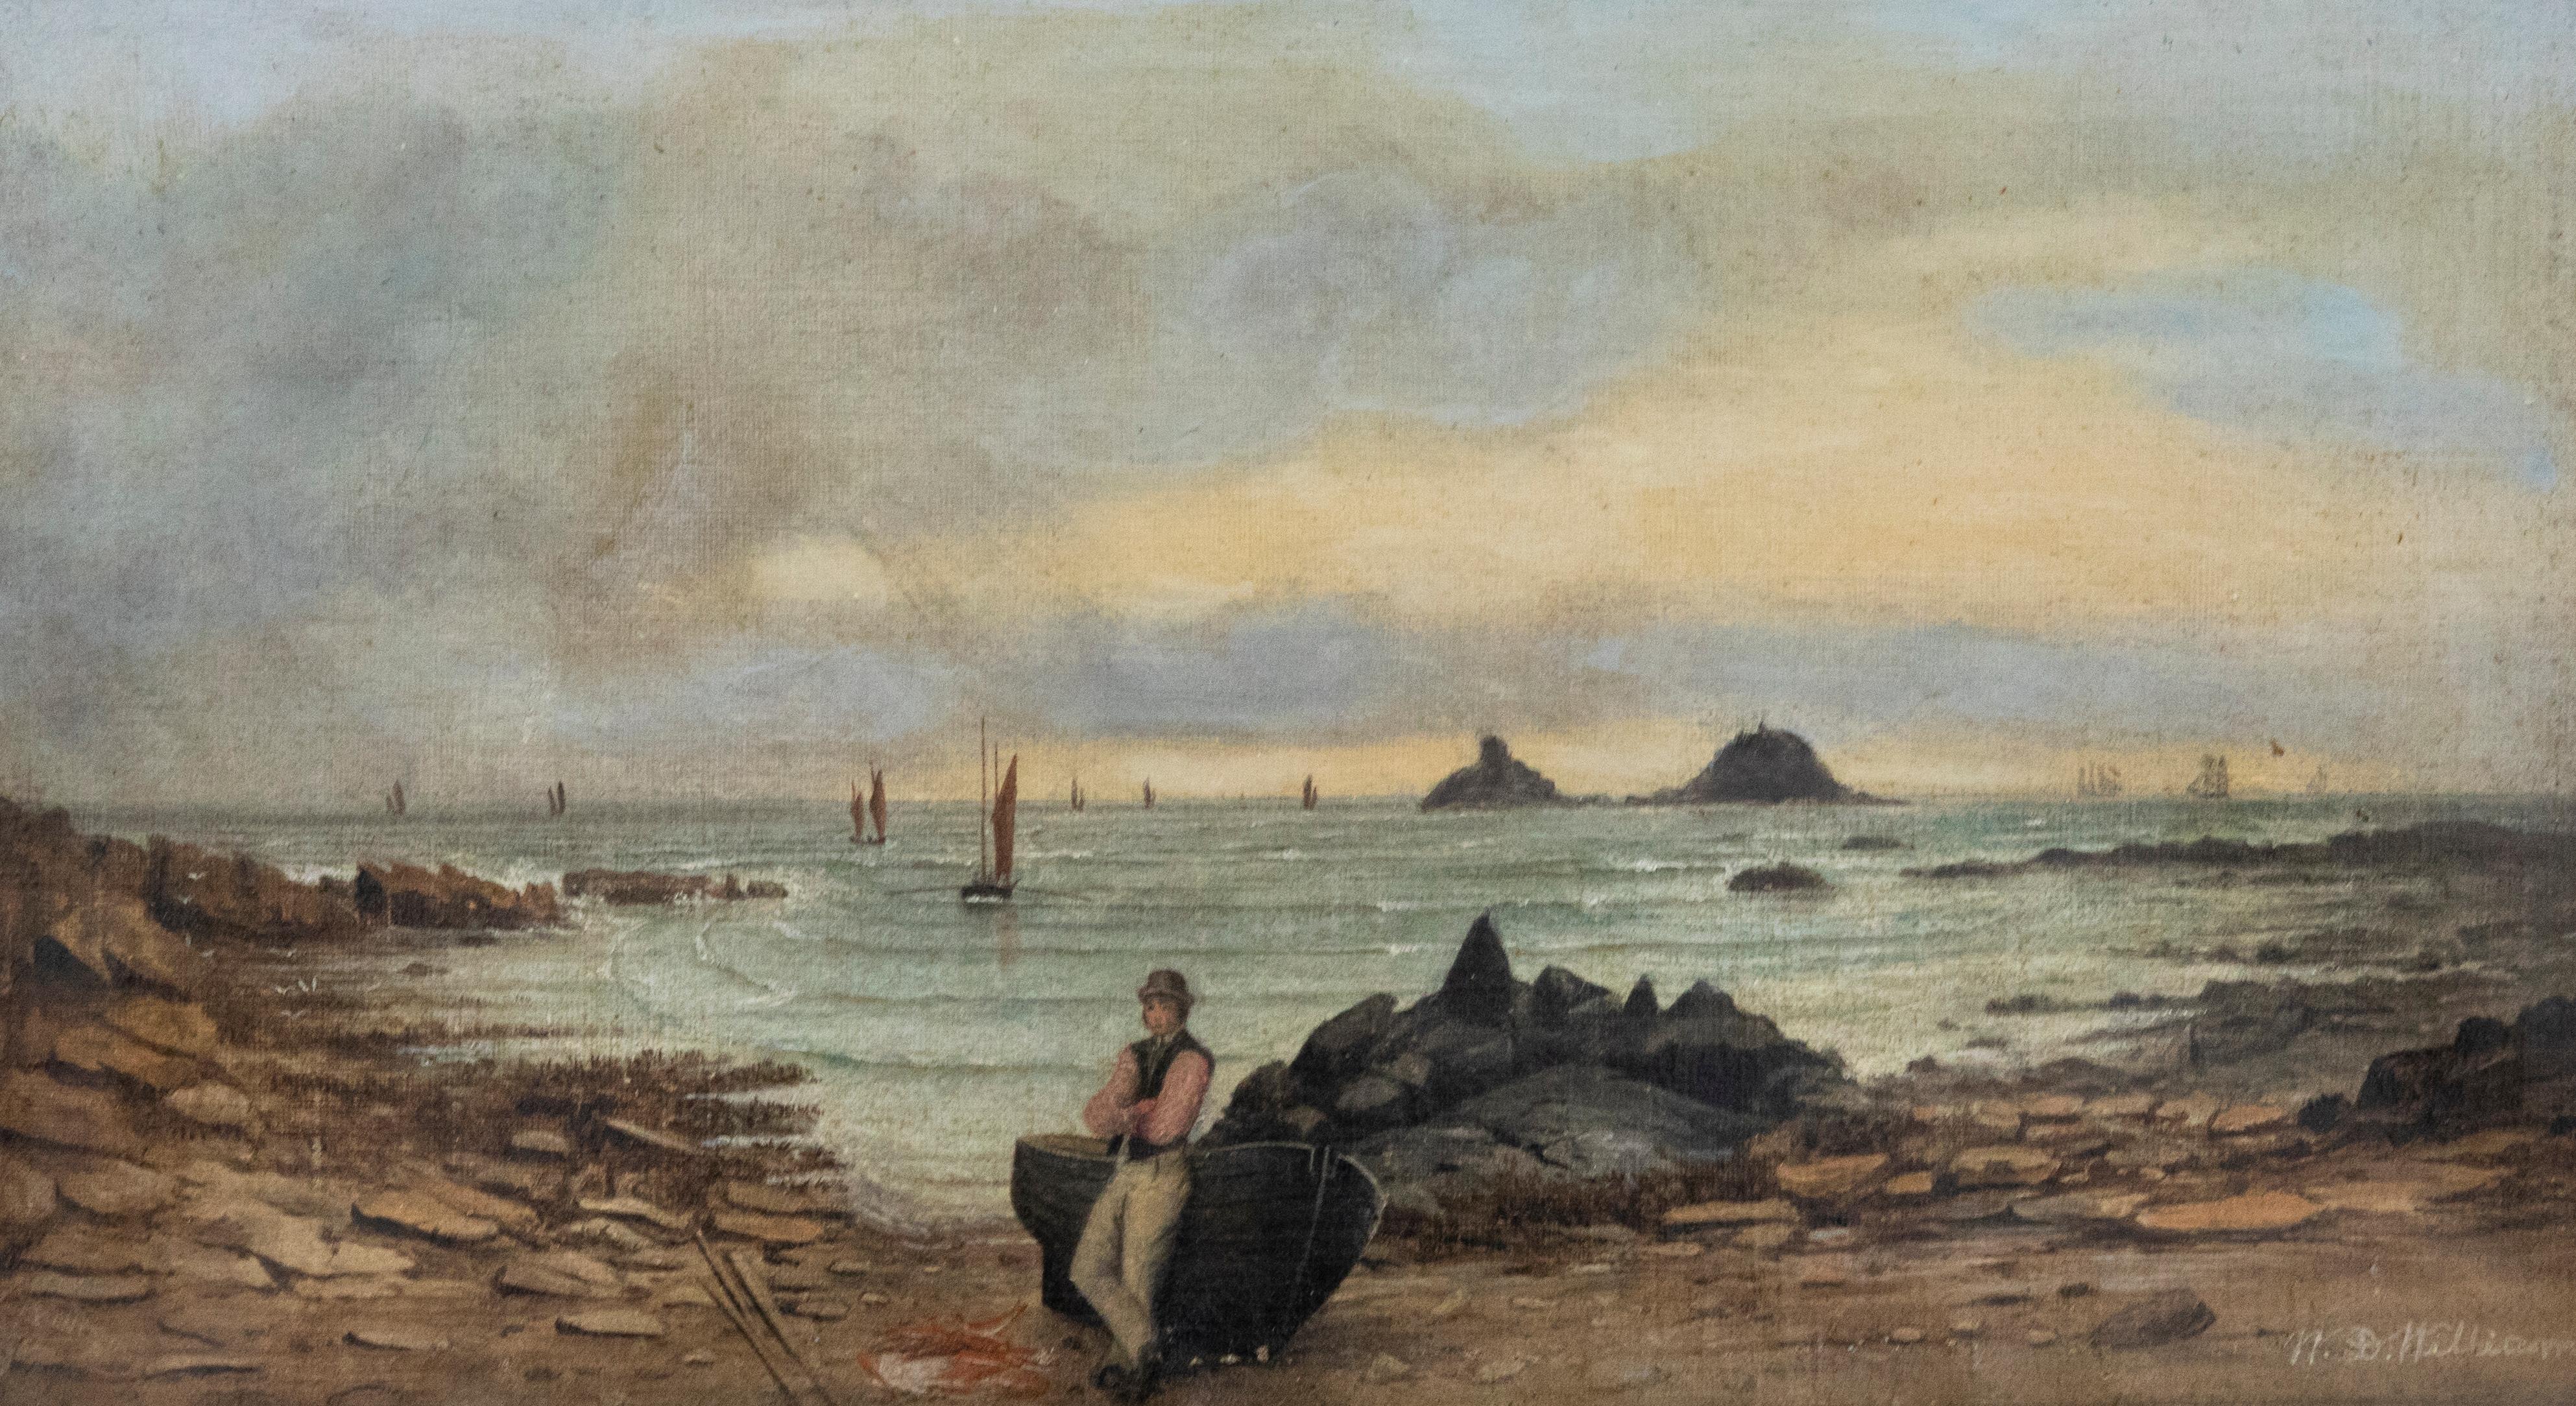 A charming 19th century seascape depicting a proud as punch fisherman standing with his catch on dry land. The artist has managed to capture a wonderful folk art feel in the panting, particularly noticeable in the figure, boat and fish. The scene